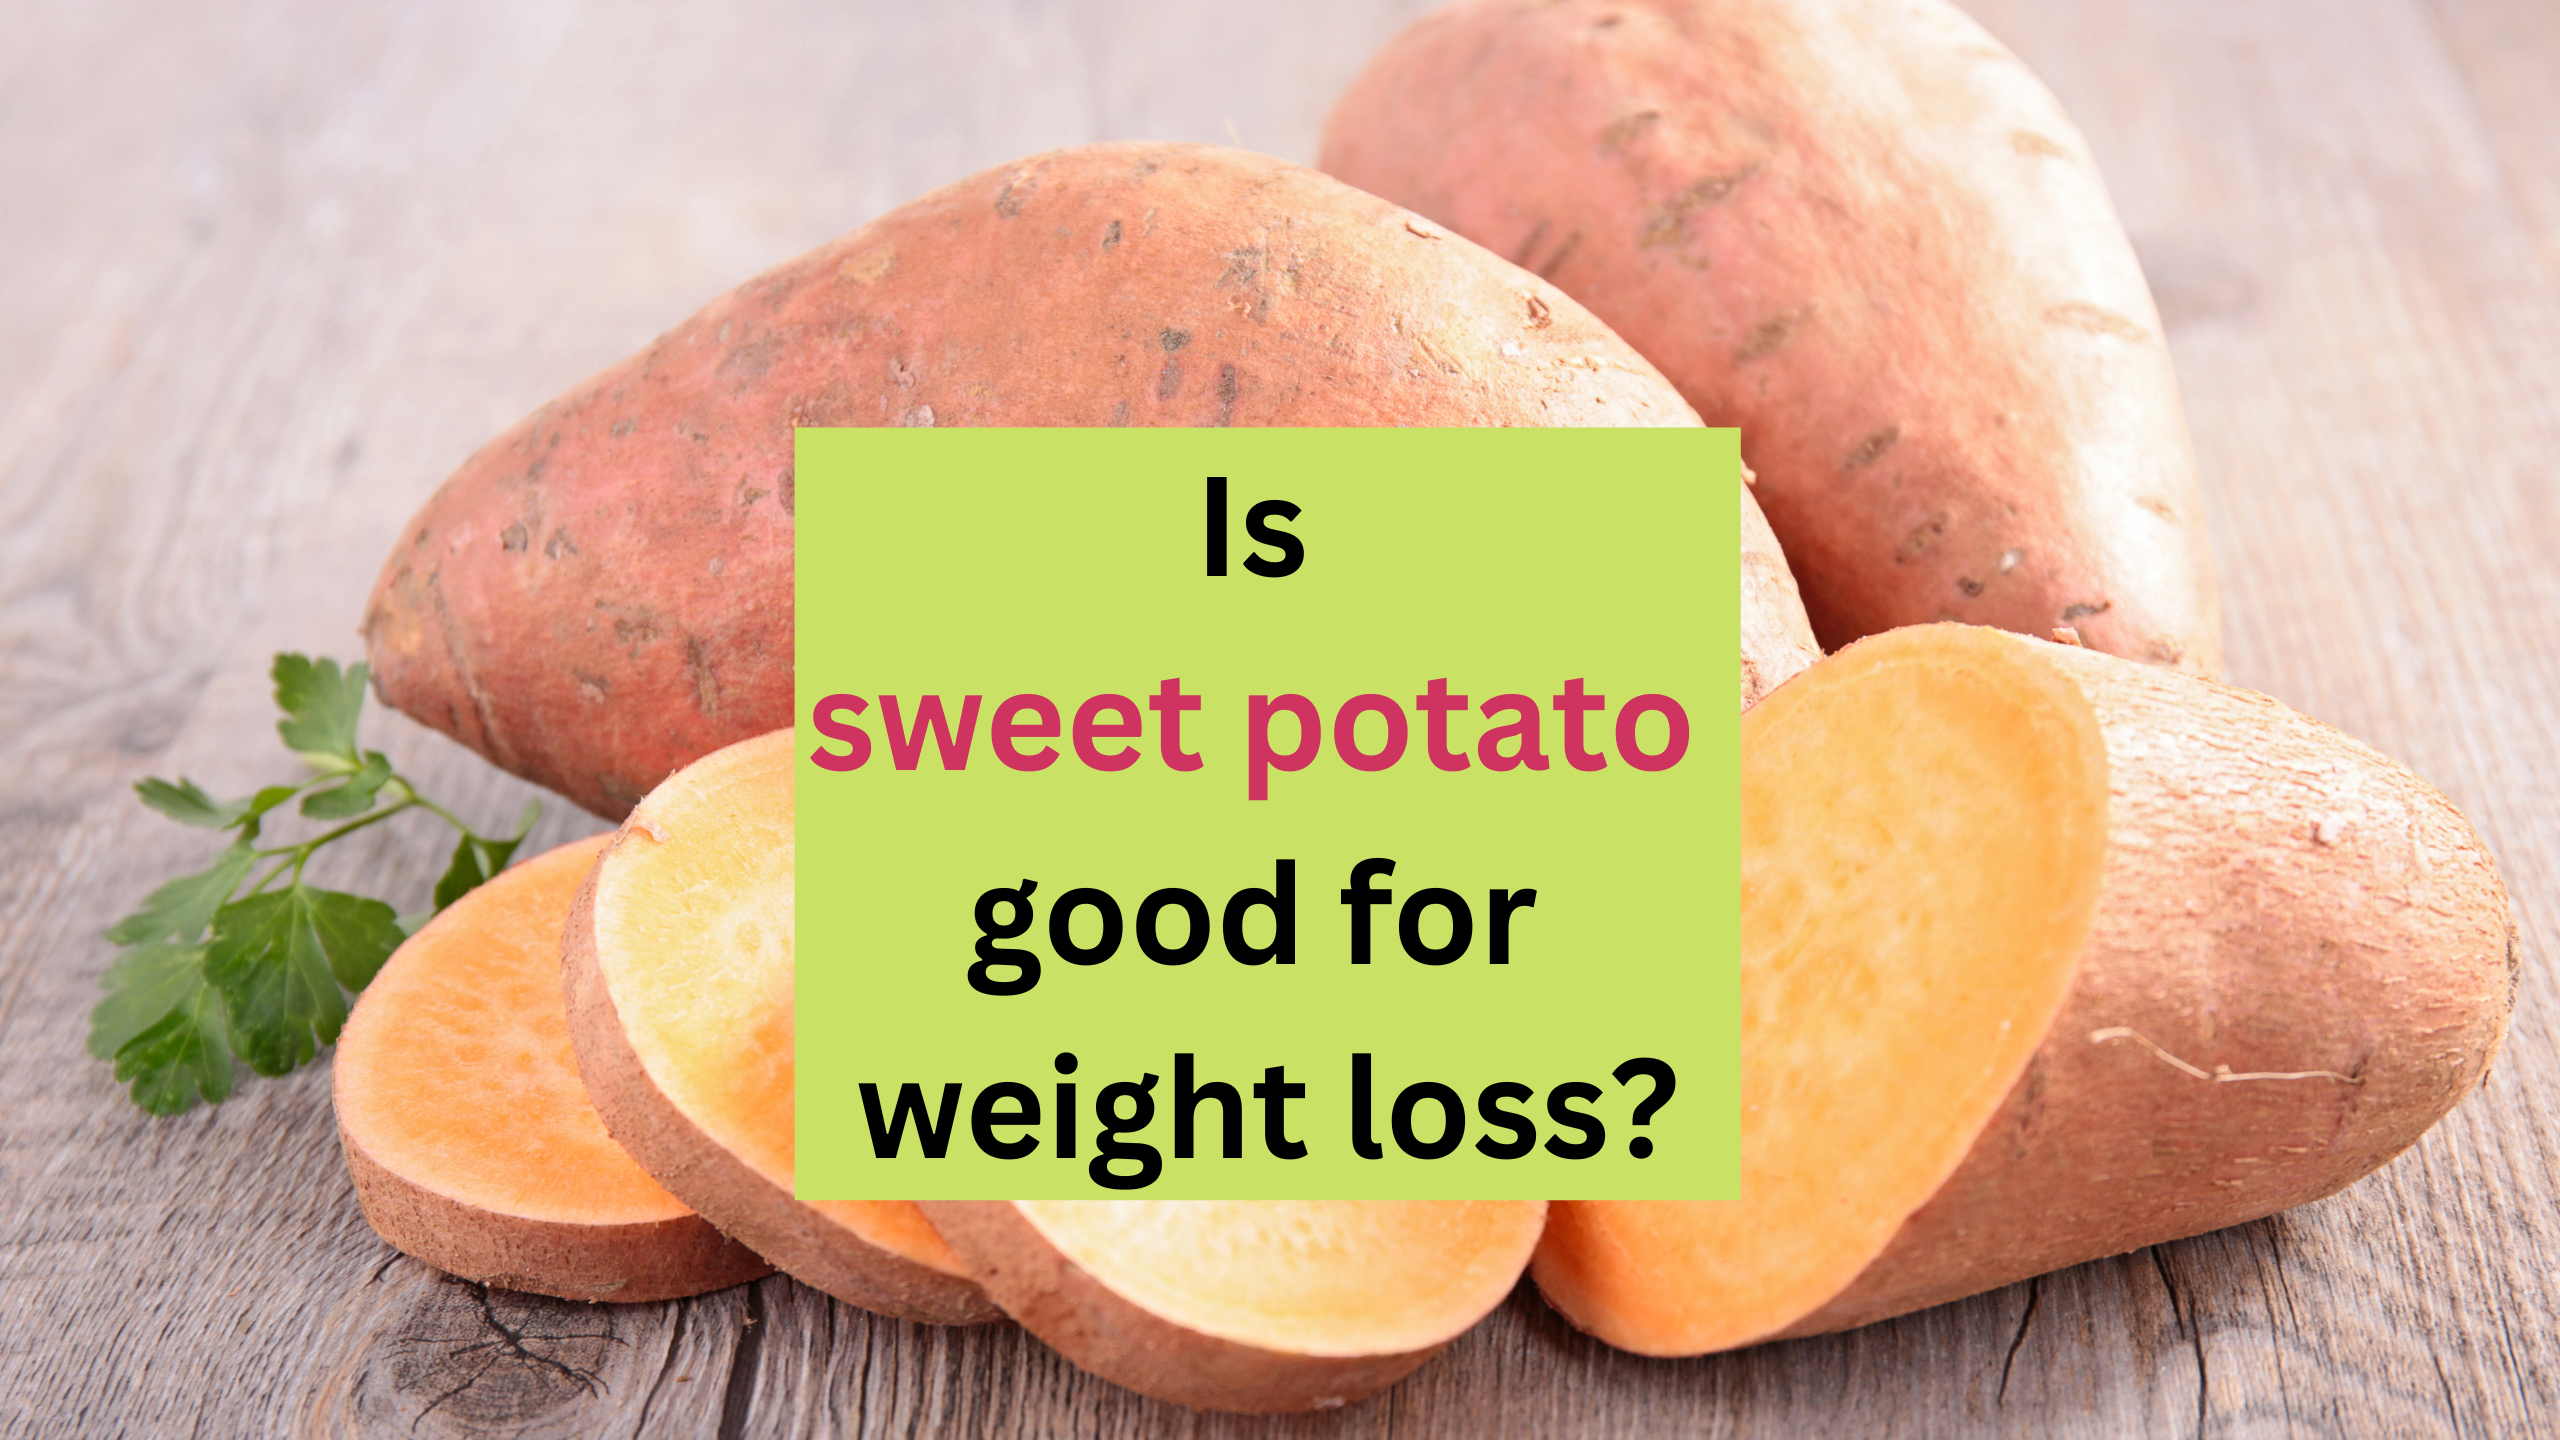 Is sweet potato good for weight loss?